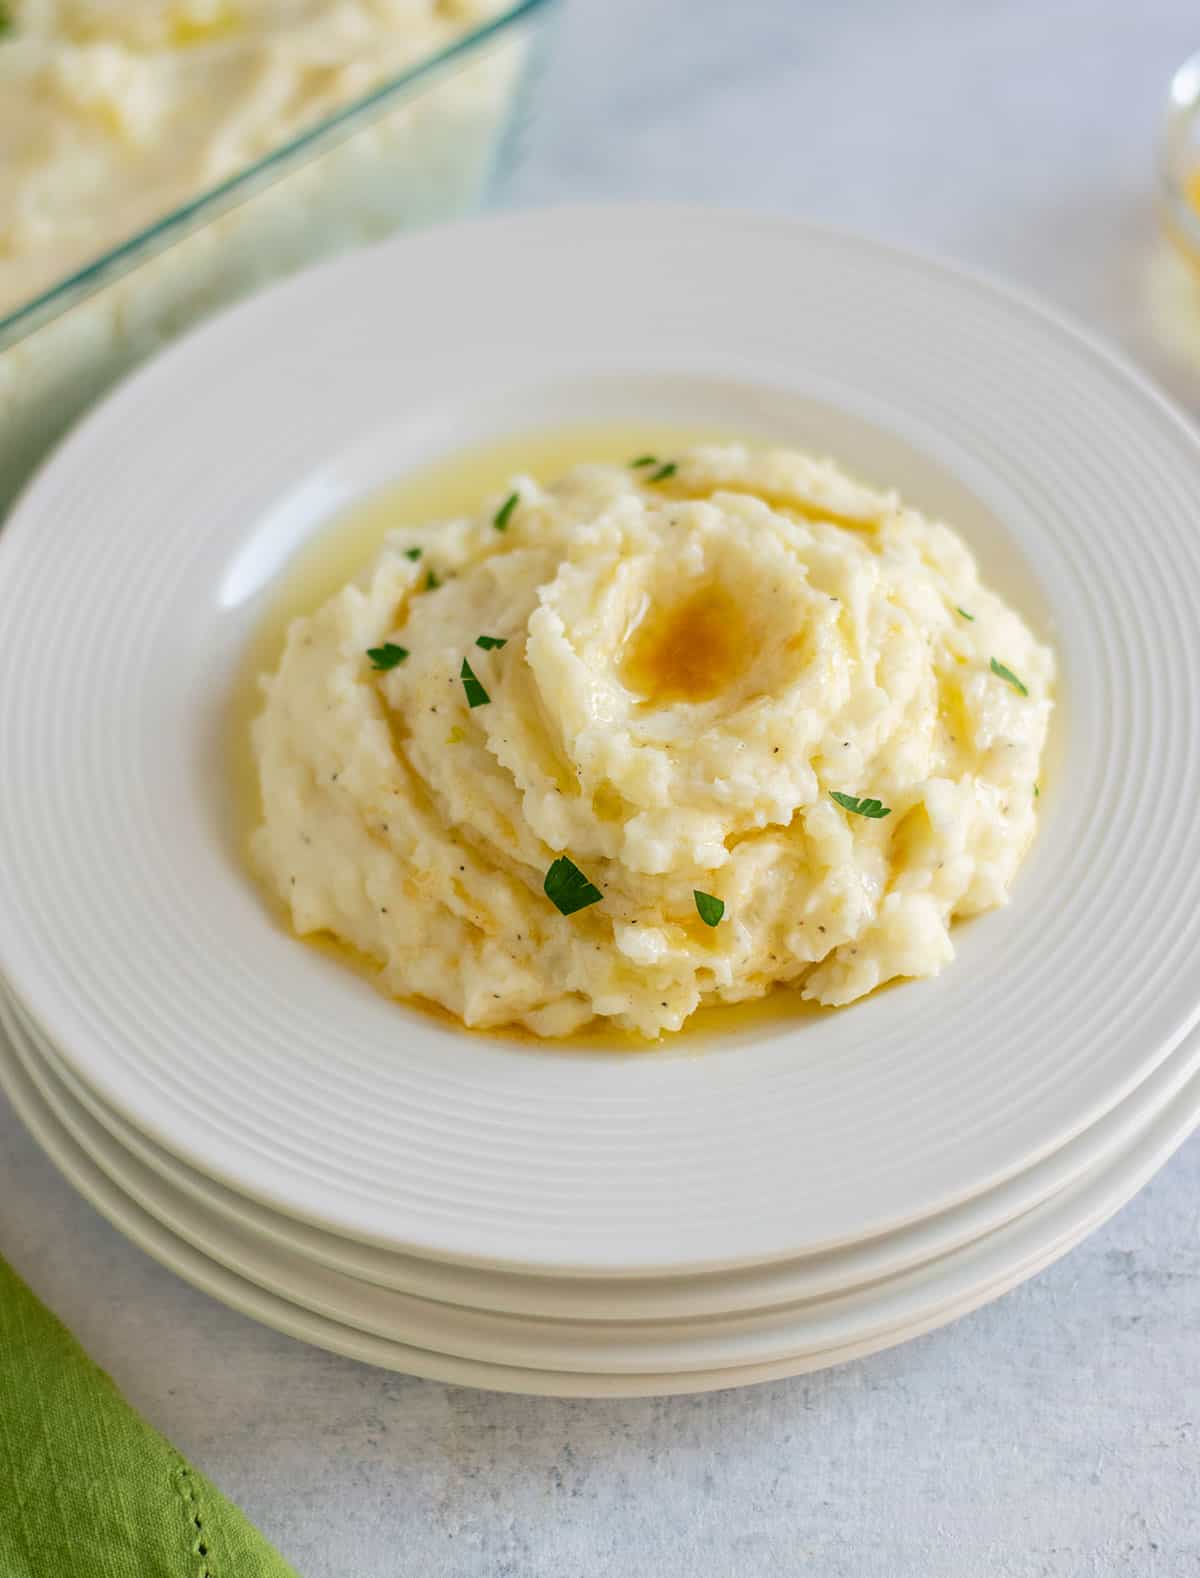 mashed potatoes with brown butter on stack of plates